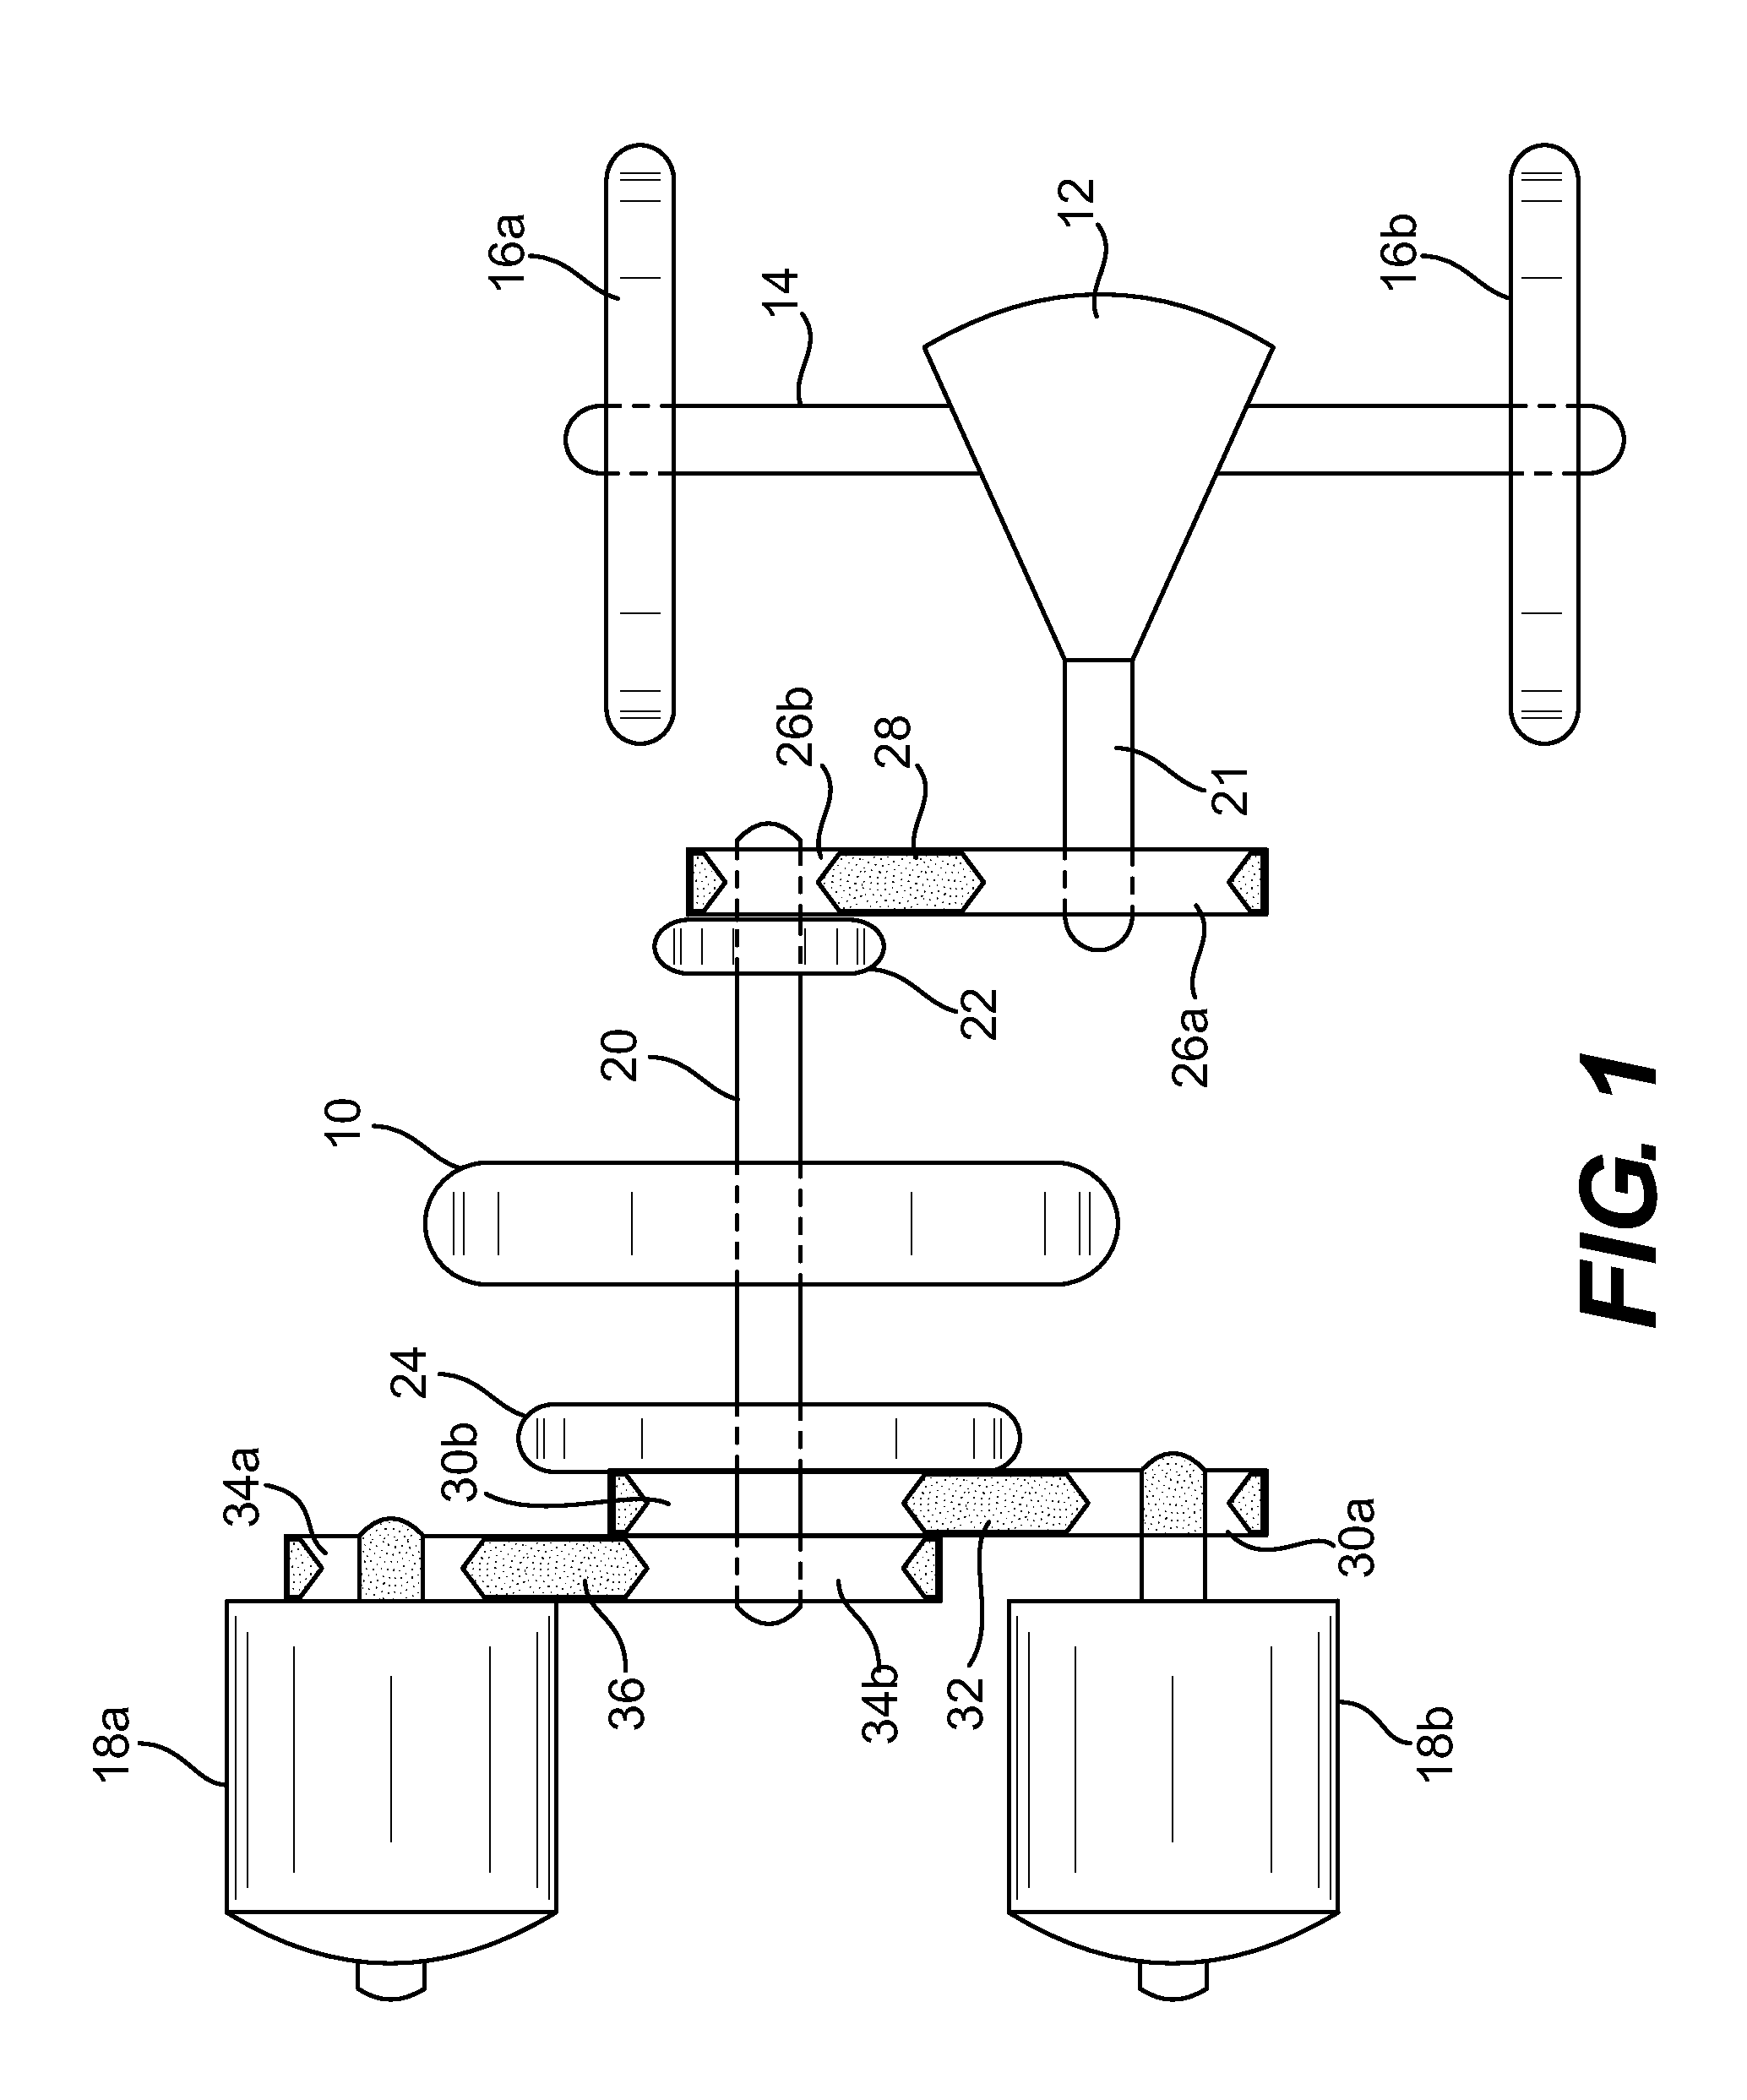 Energy recovery drive system and vehicle with energy recovery drive system